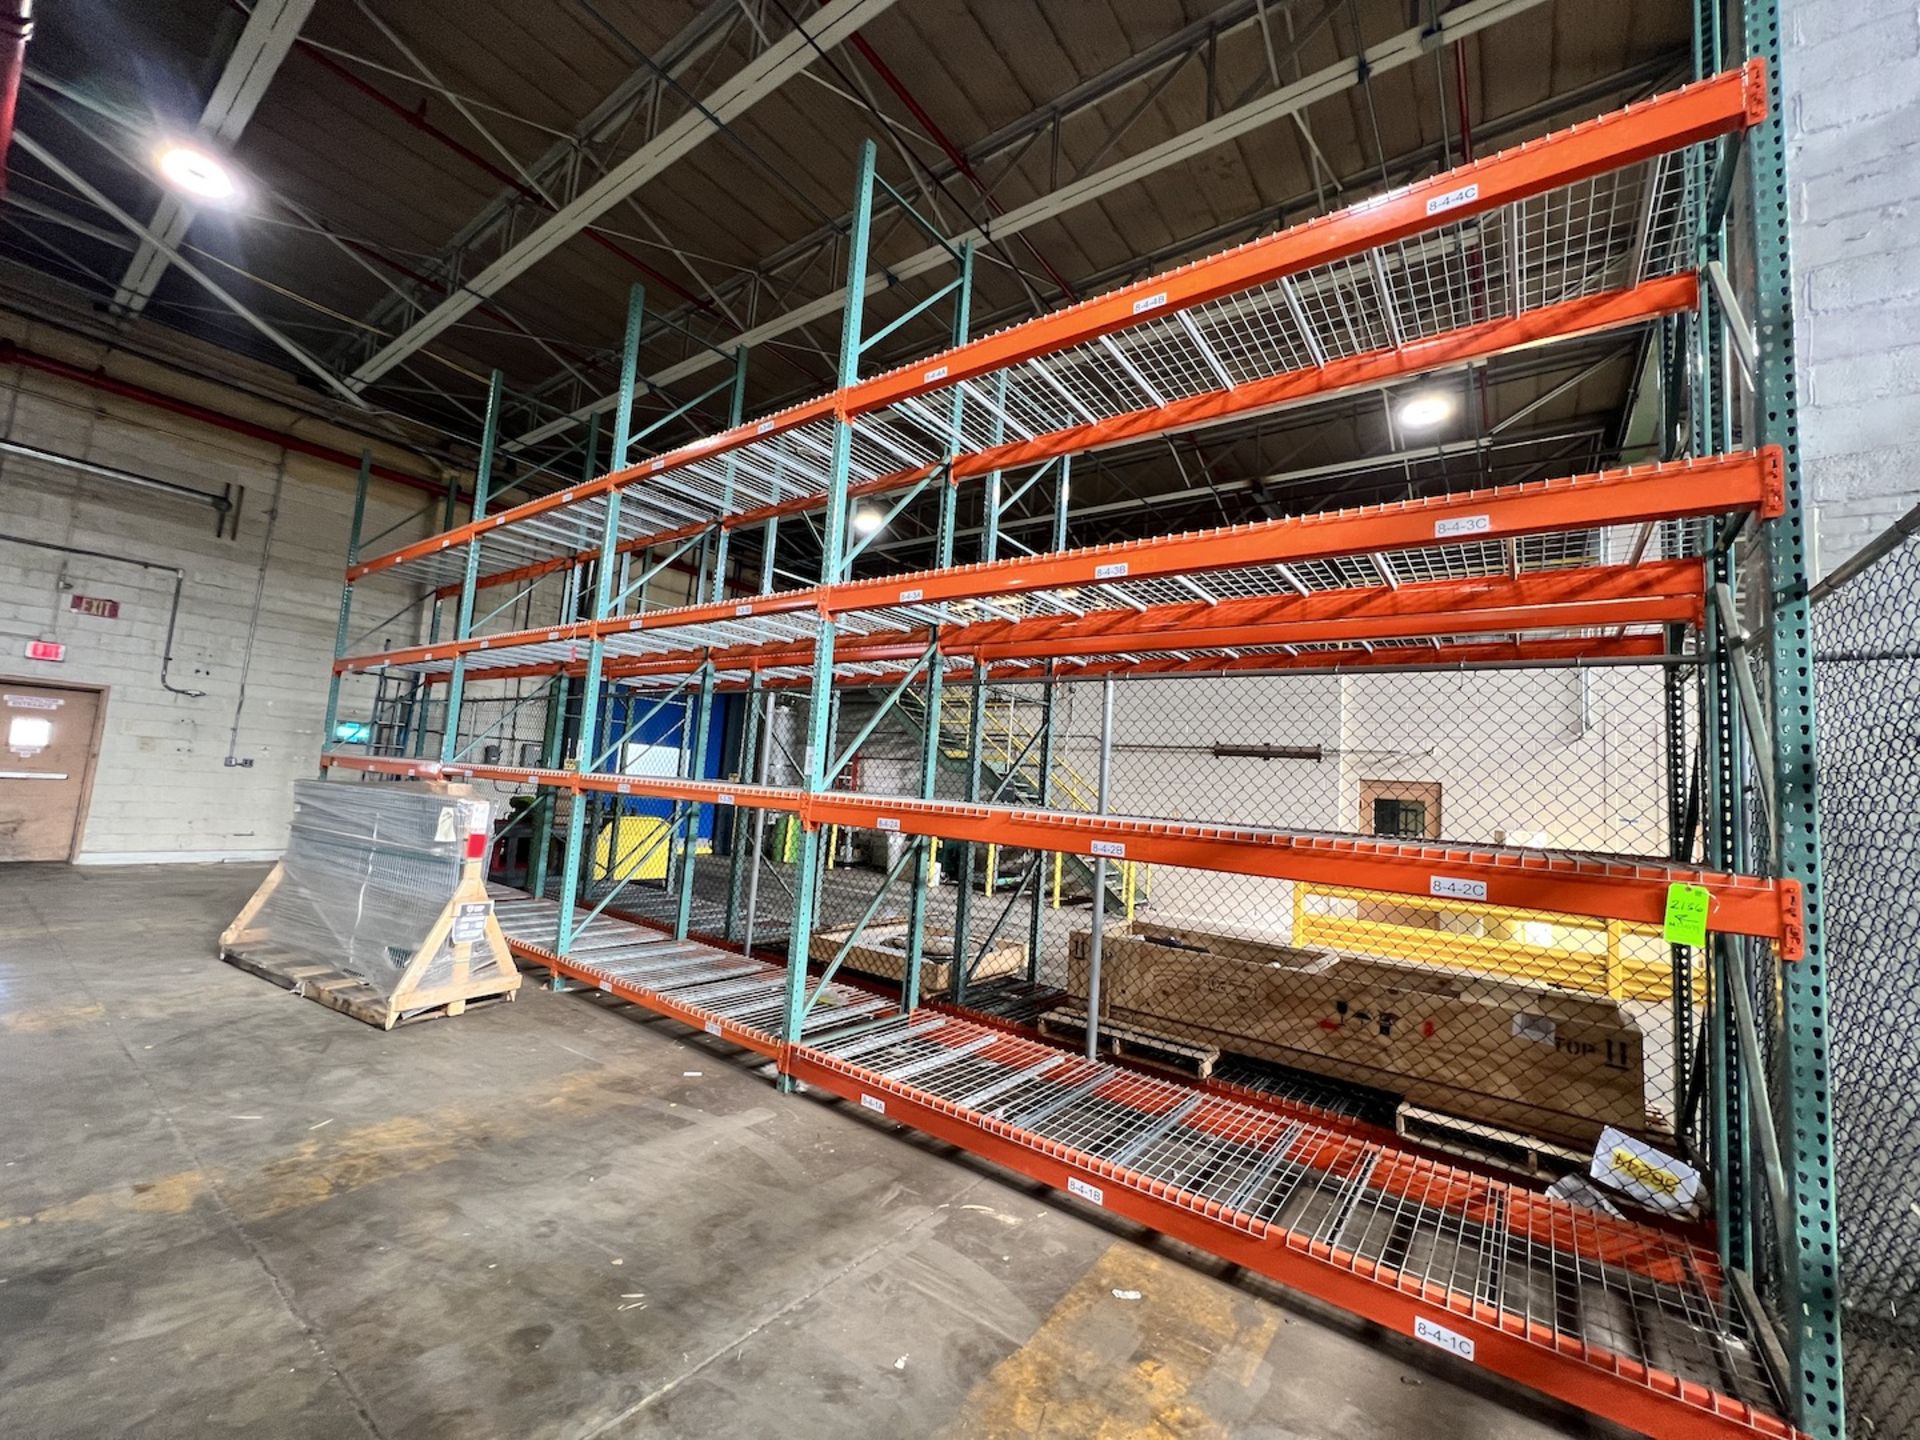 PALLET RACKING, 5 UP-RIGHTS AND 32 CROSS BEAMS